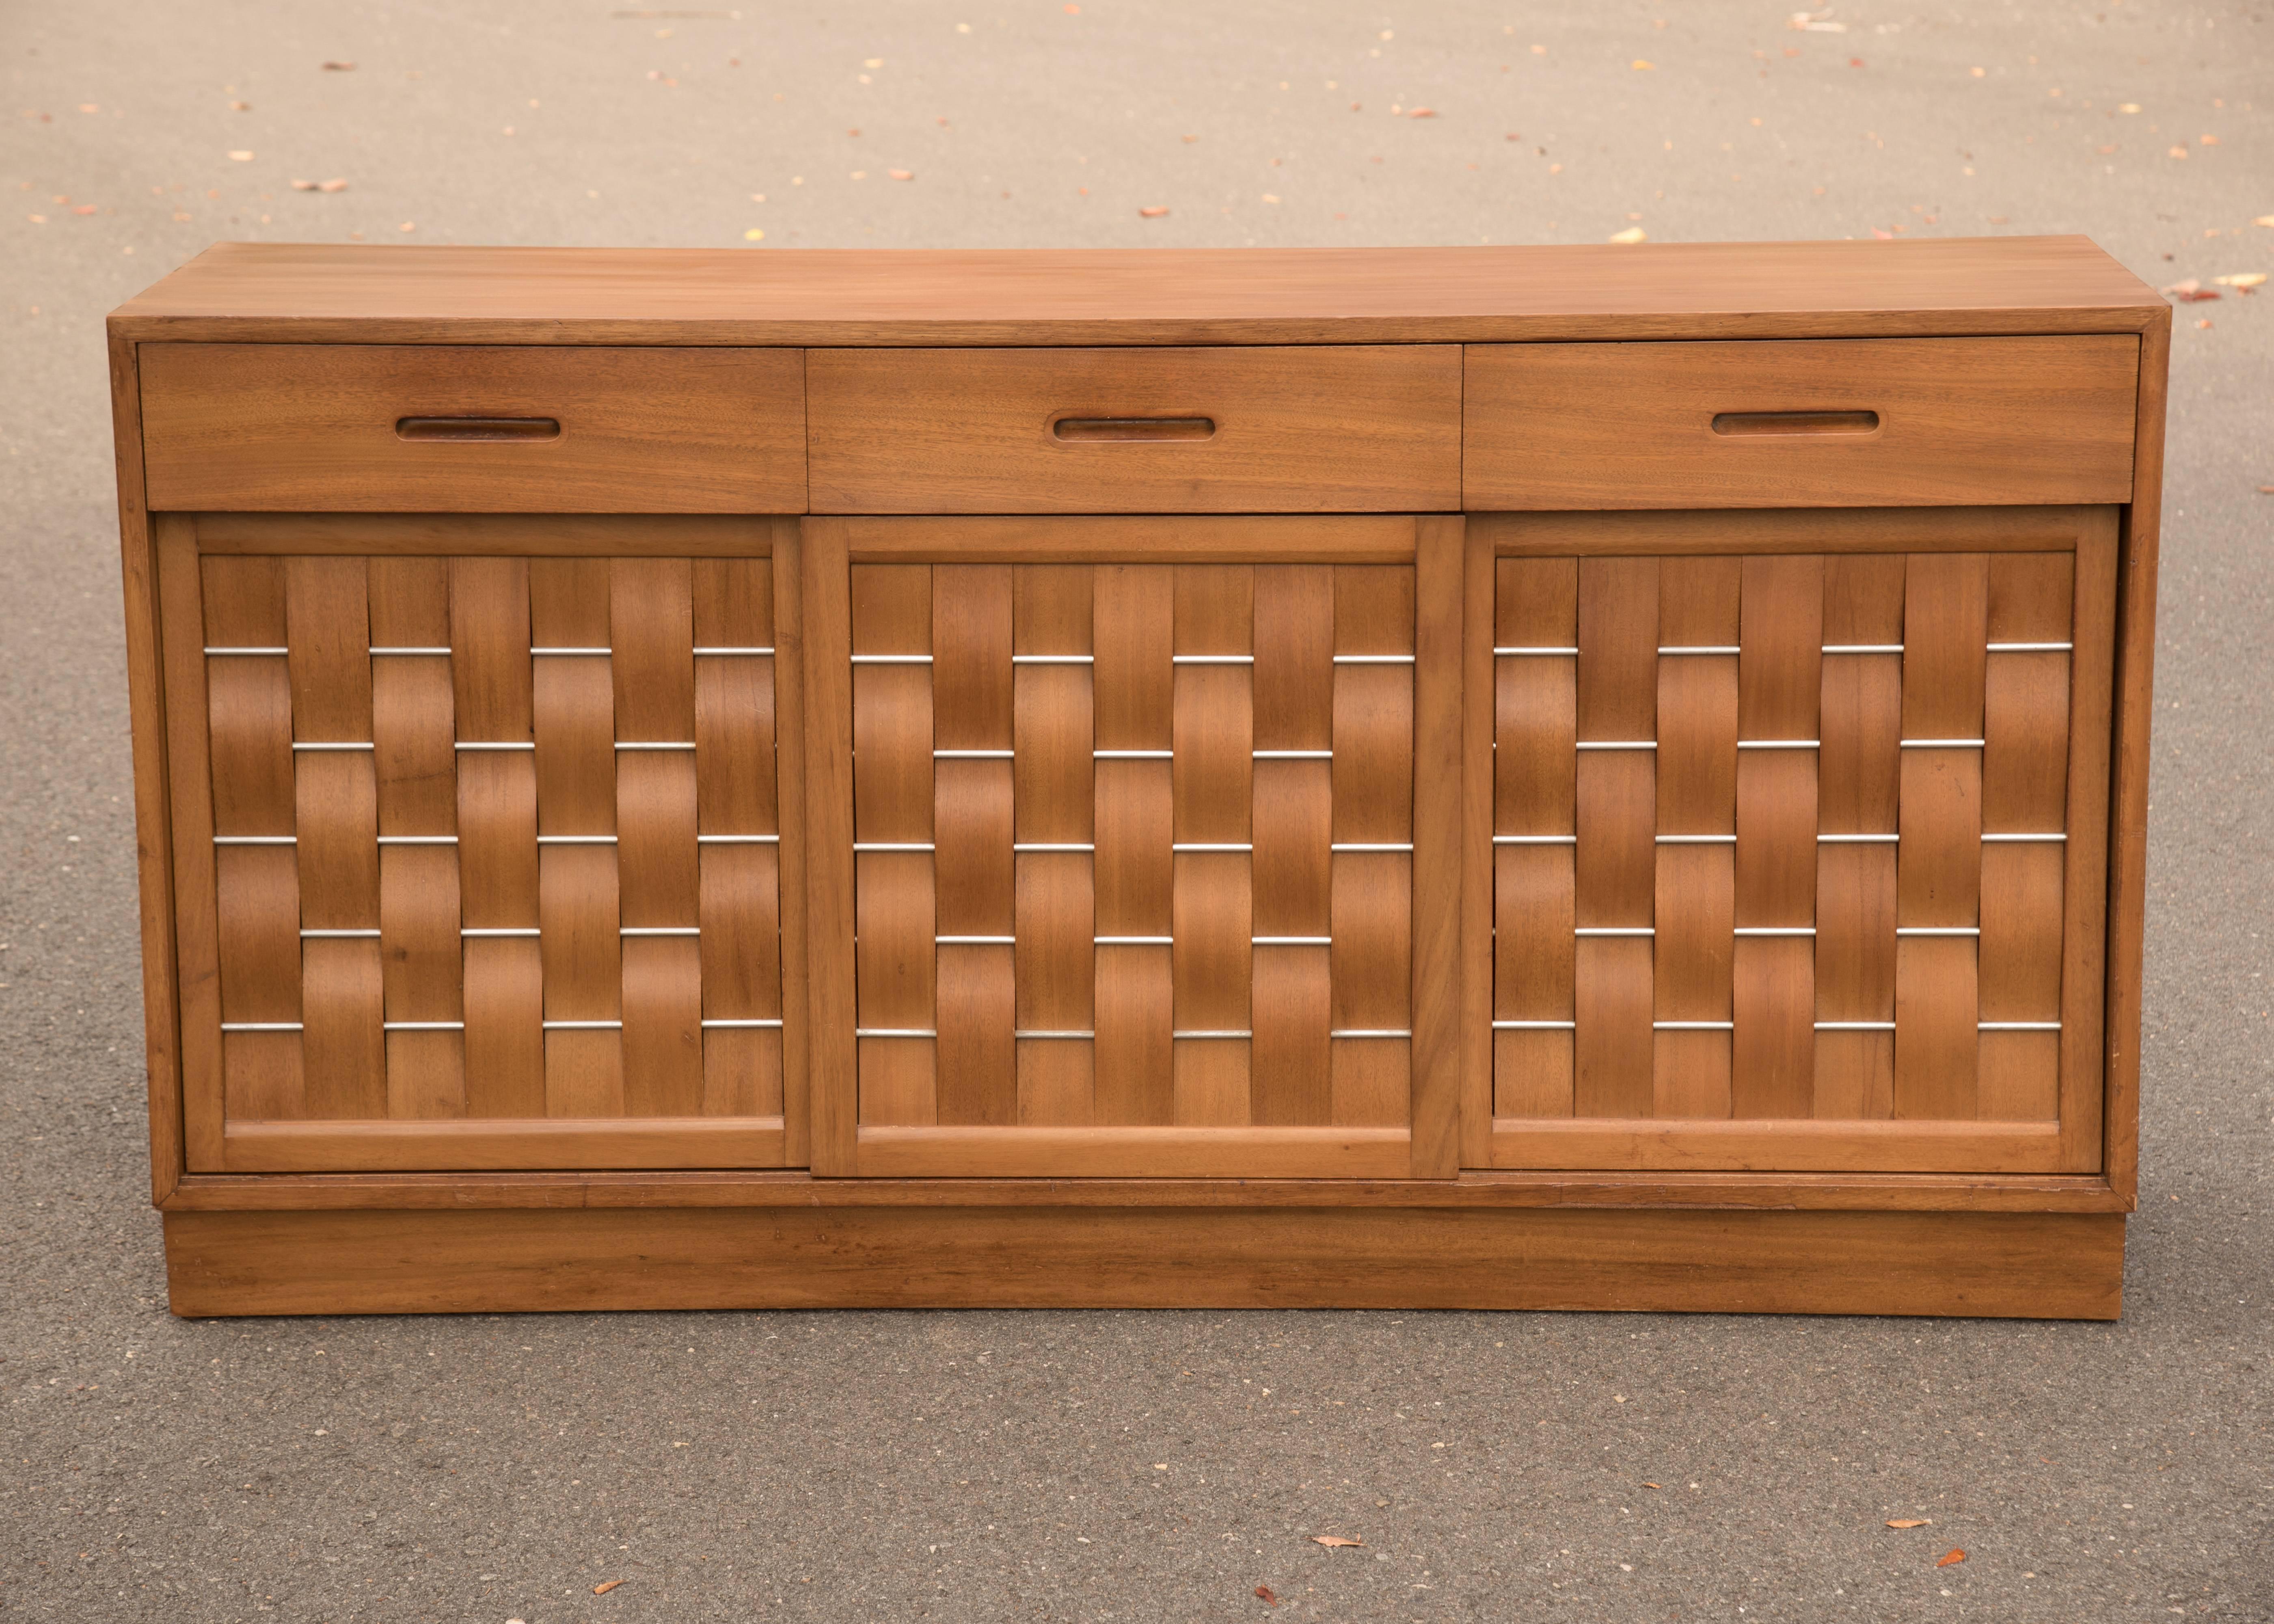 Stunning Mid-Century Modern cabinet by Edward Wormley for Dunbar having 
woven front panel doors that slide open to reveal three drawers on the right and left and shelves in the center. Mahogany, aluminum; marked on back.
  